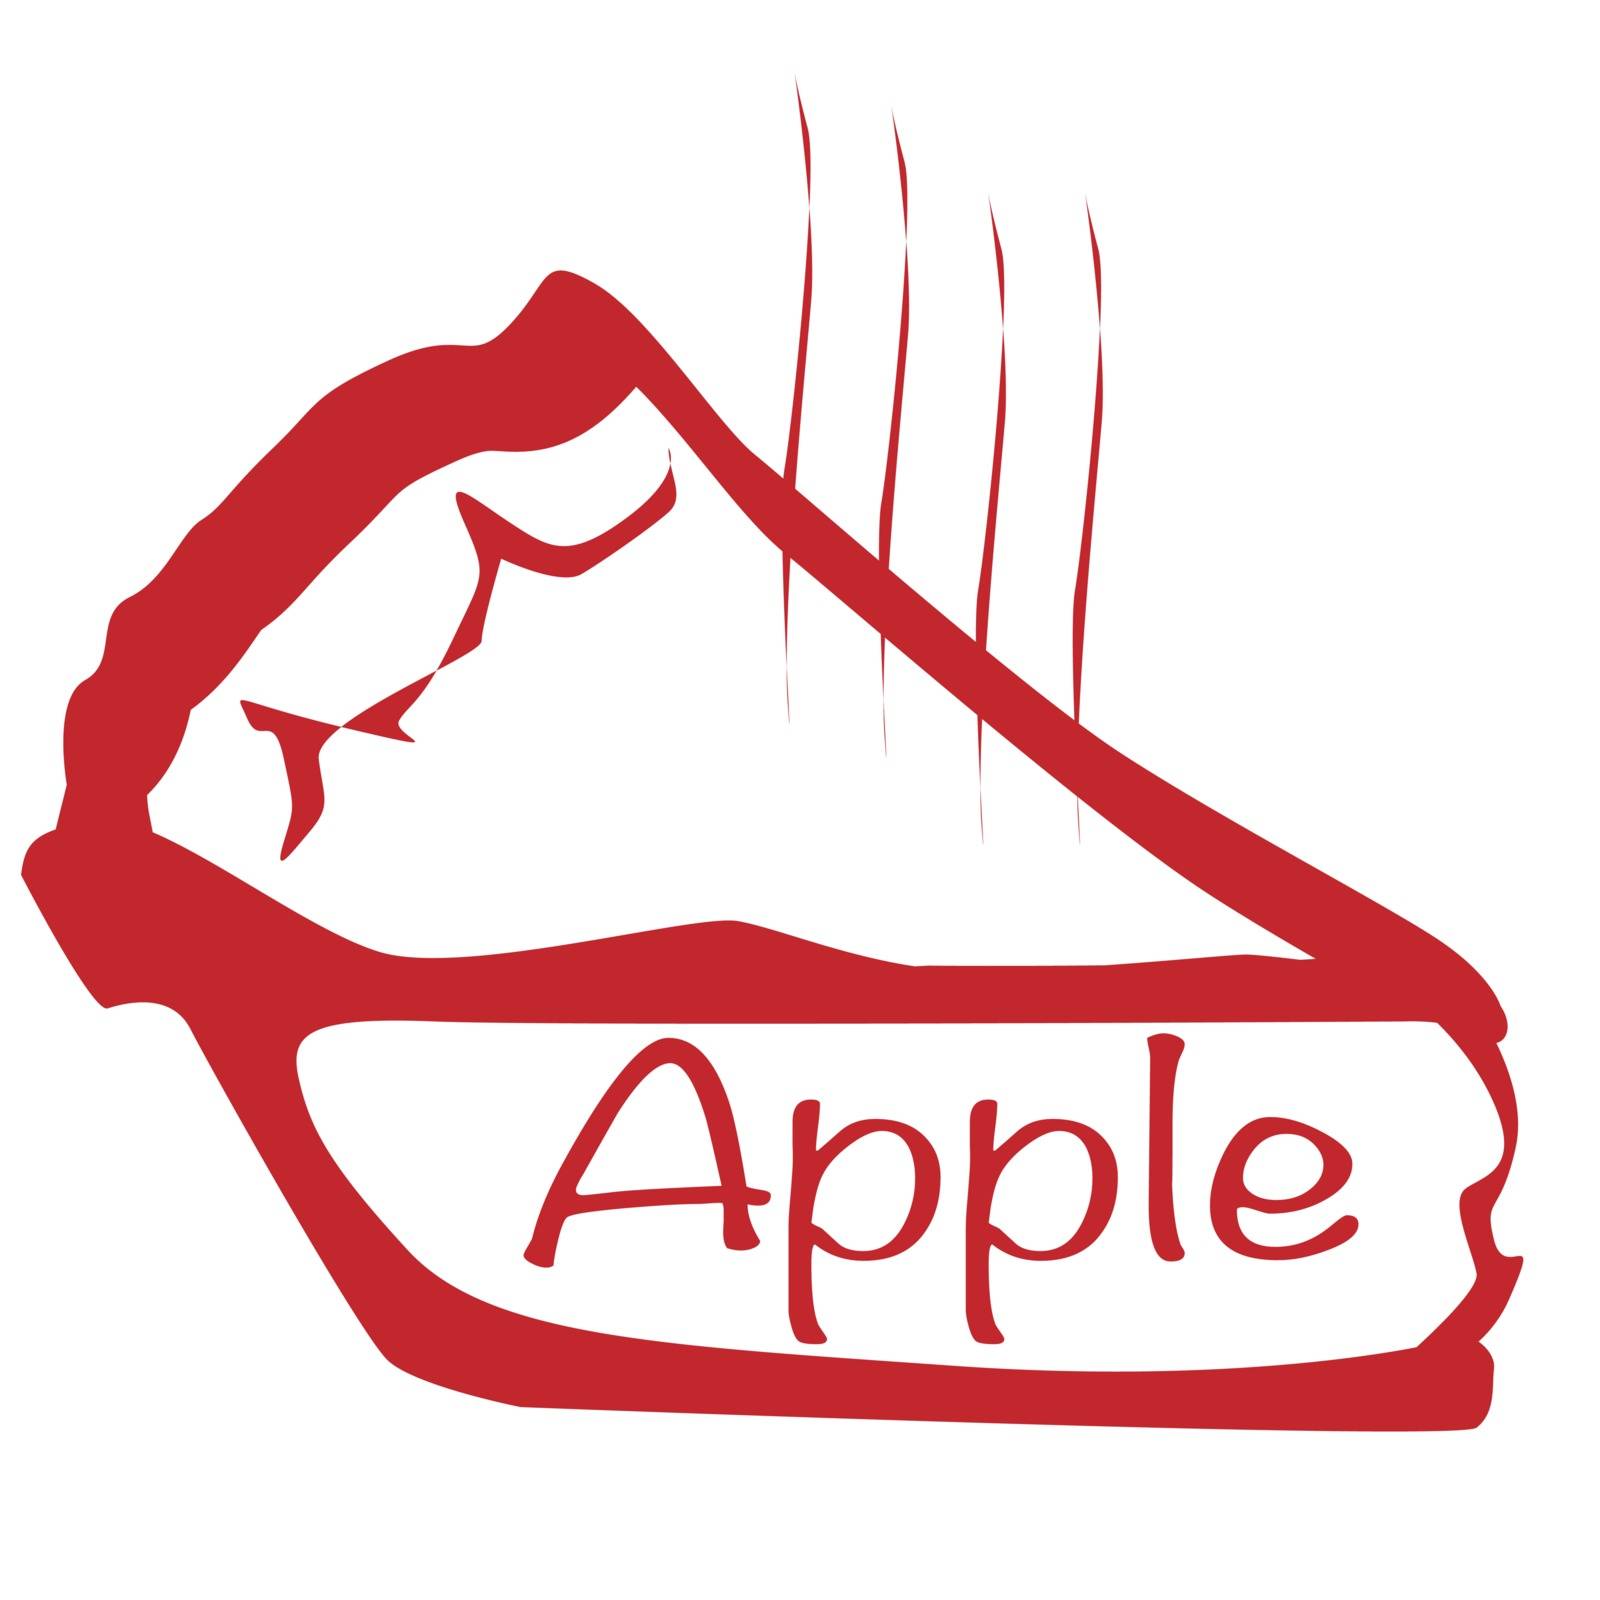 Cartoon depiction of a hot apple pie over a white background